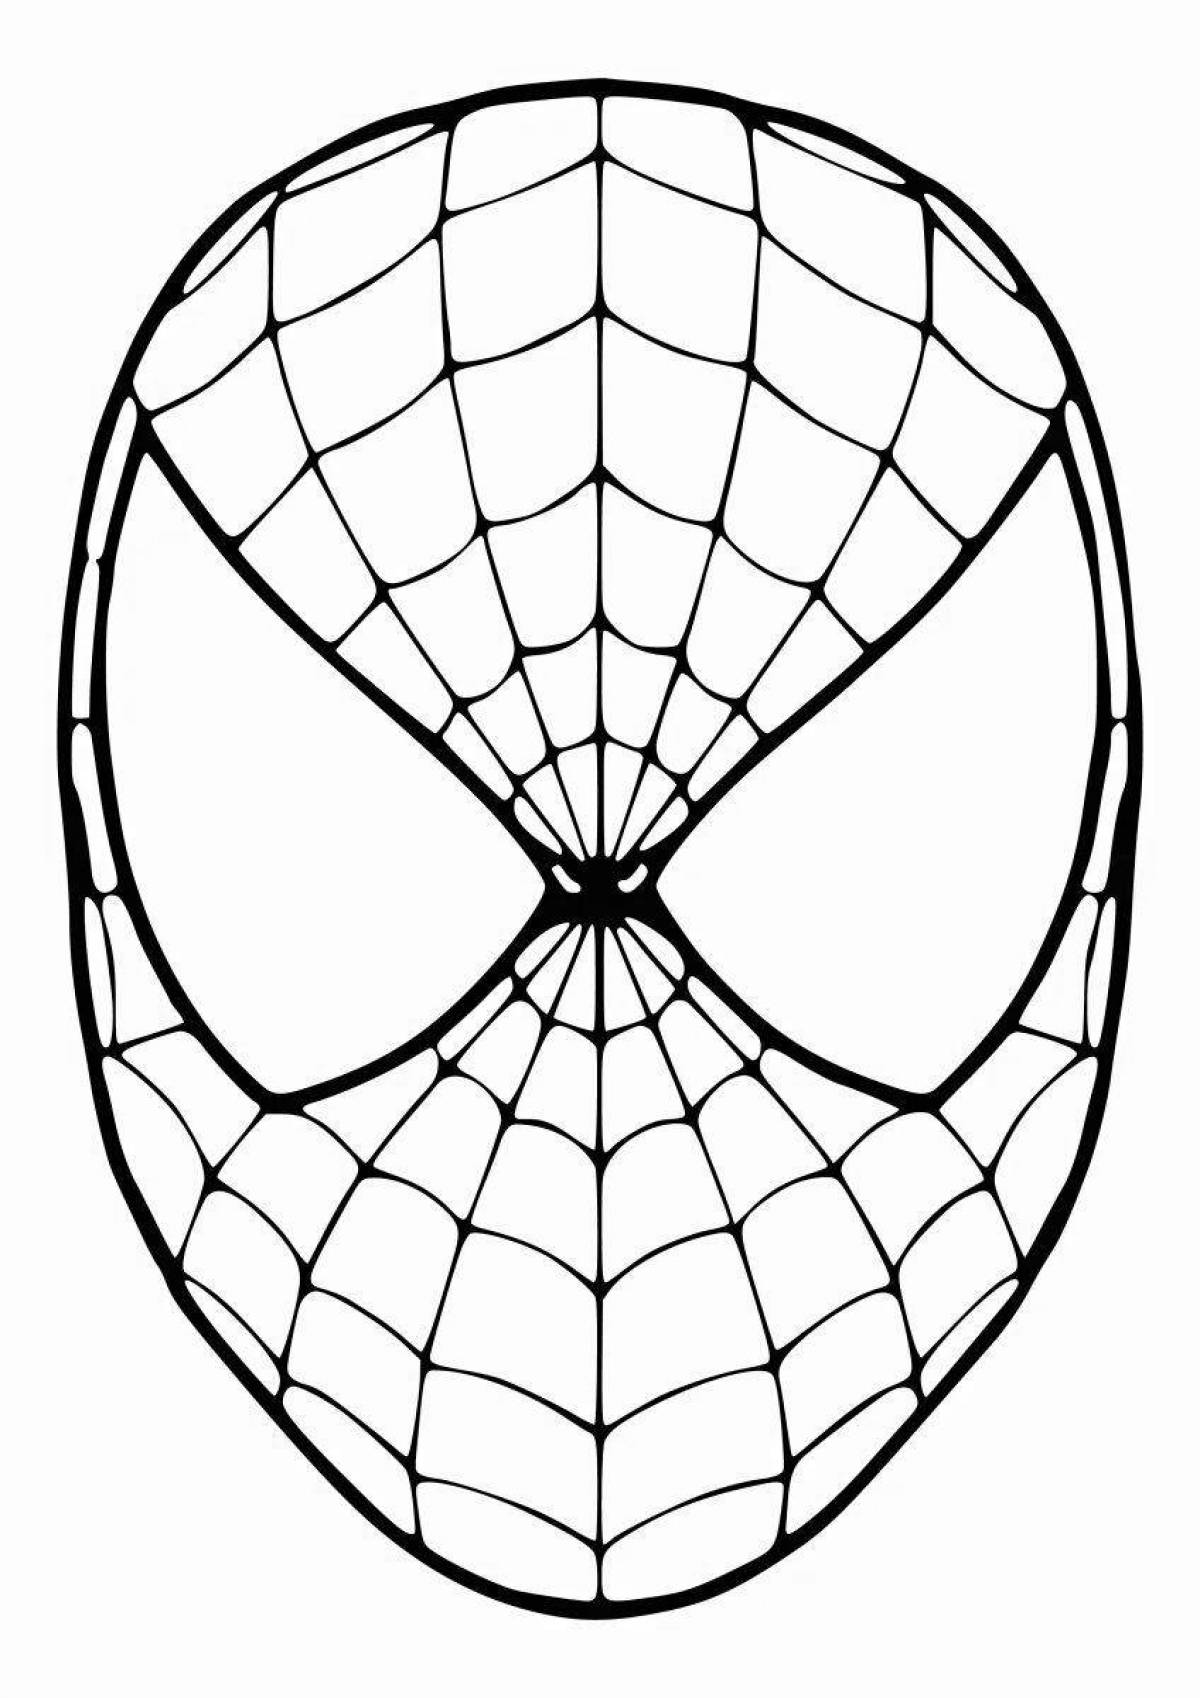 Spider-man dramatic face coloring page